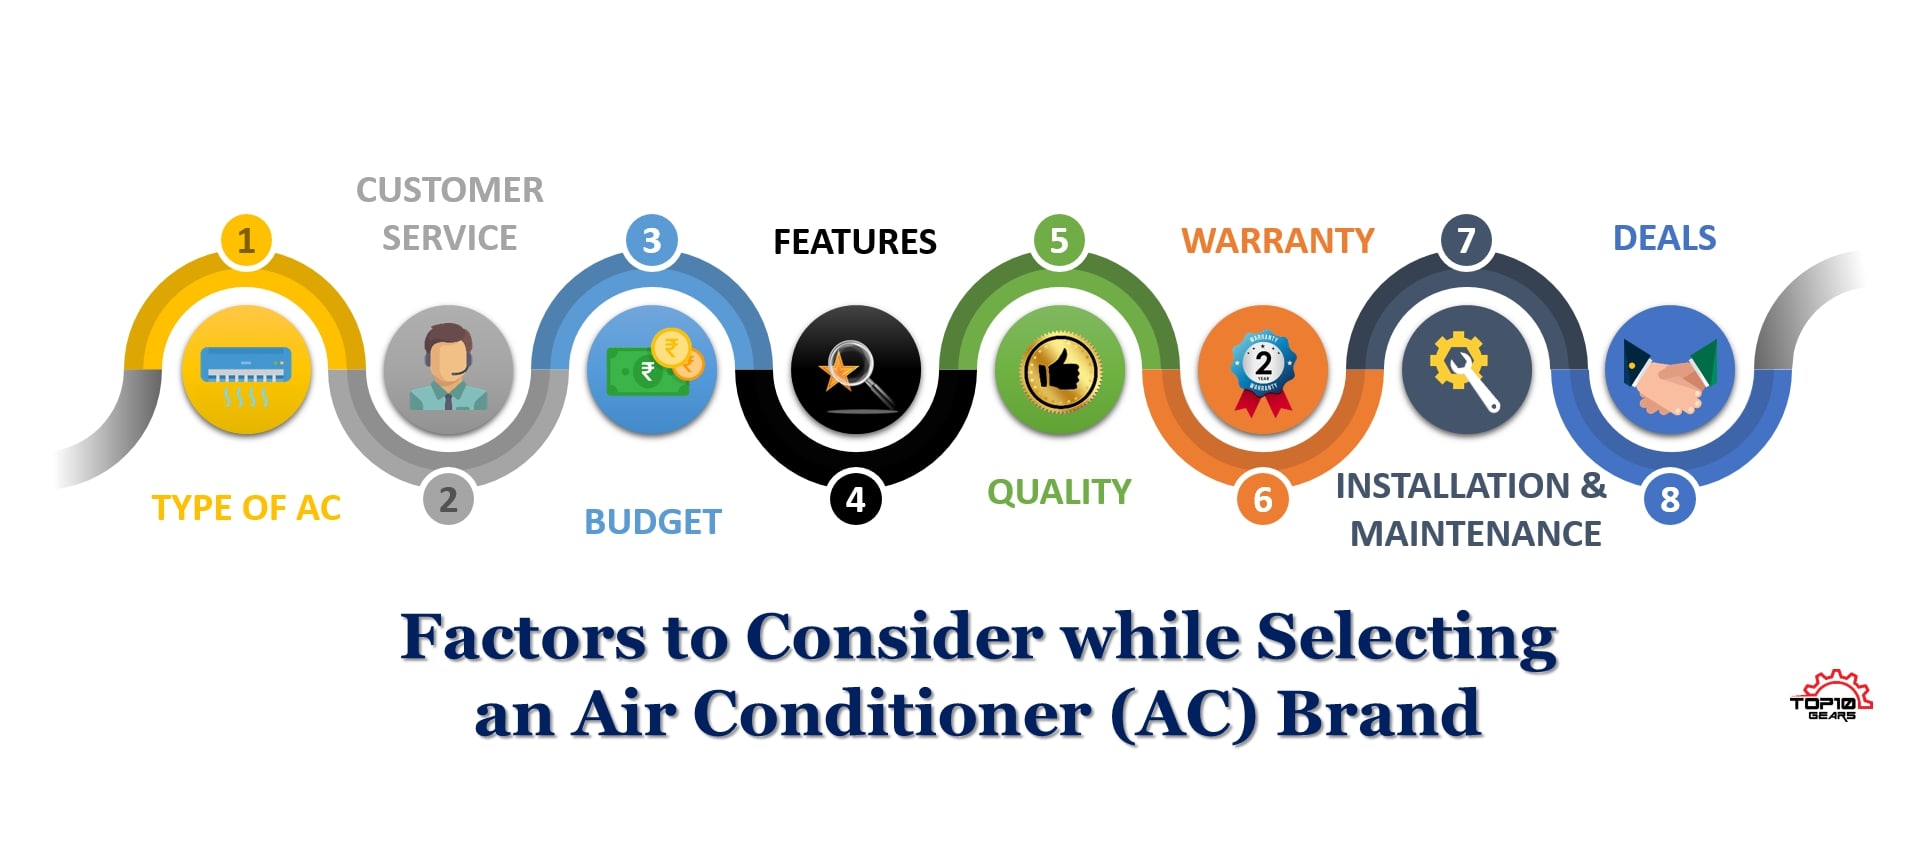 How to choose an AC brand